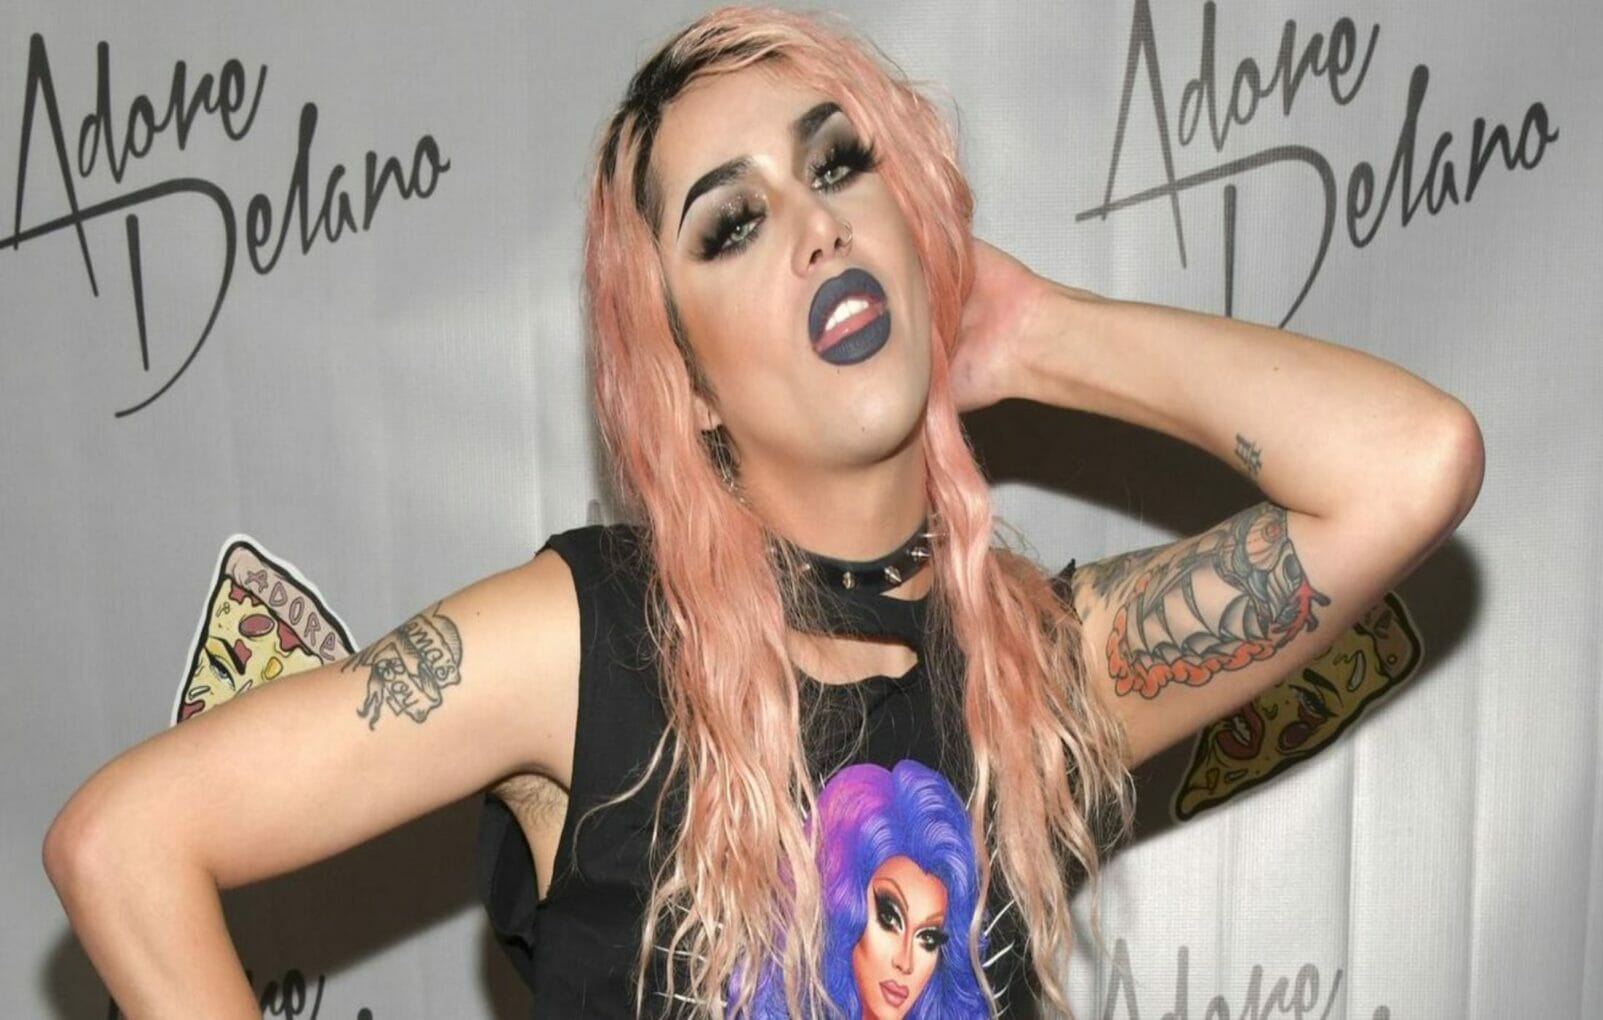 Adore Delano (Singer) bio: wiki, age, relationship, sexuality, height, weight, net worth